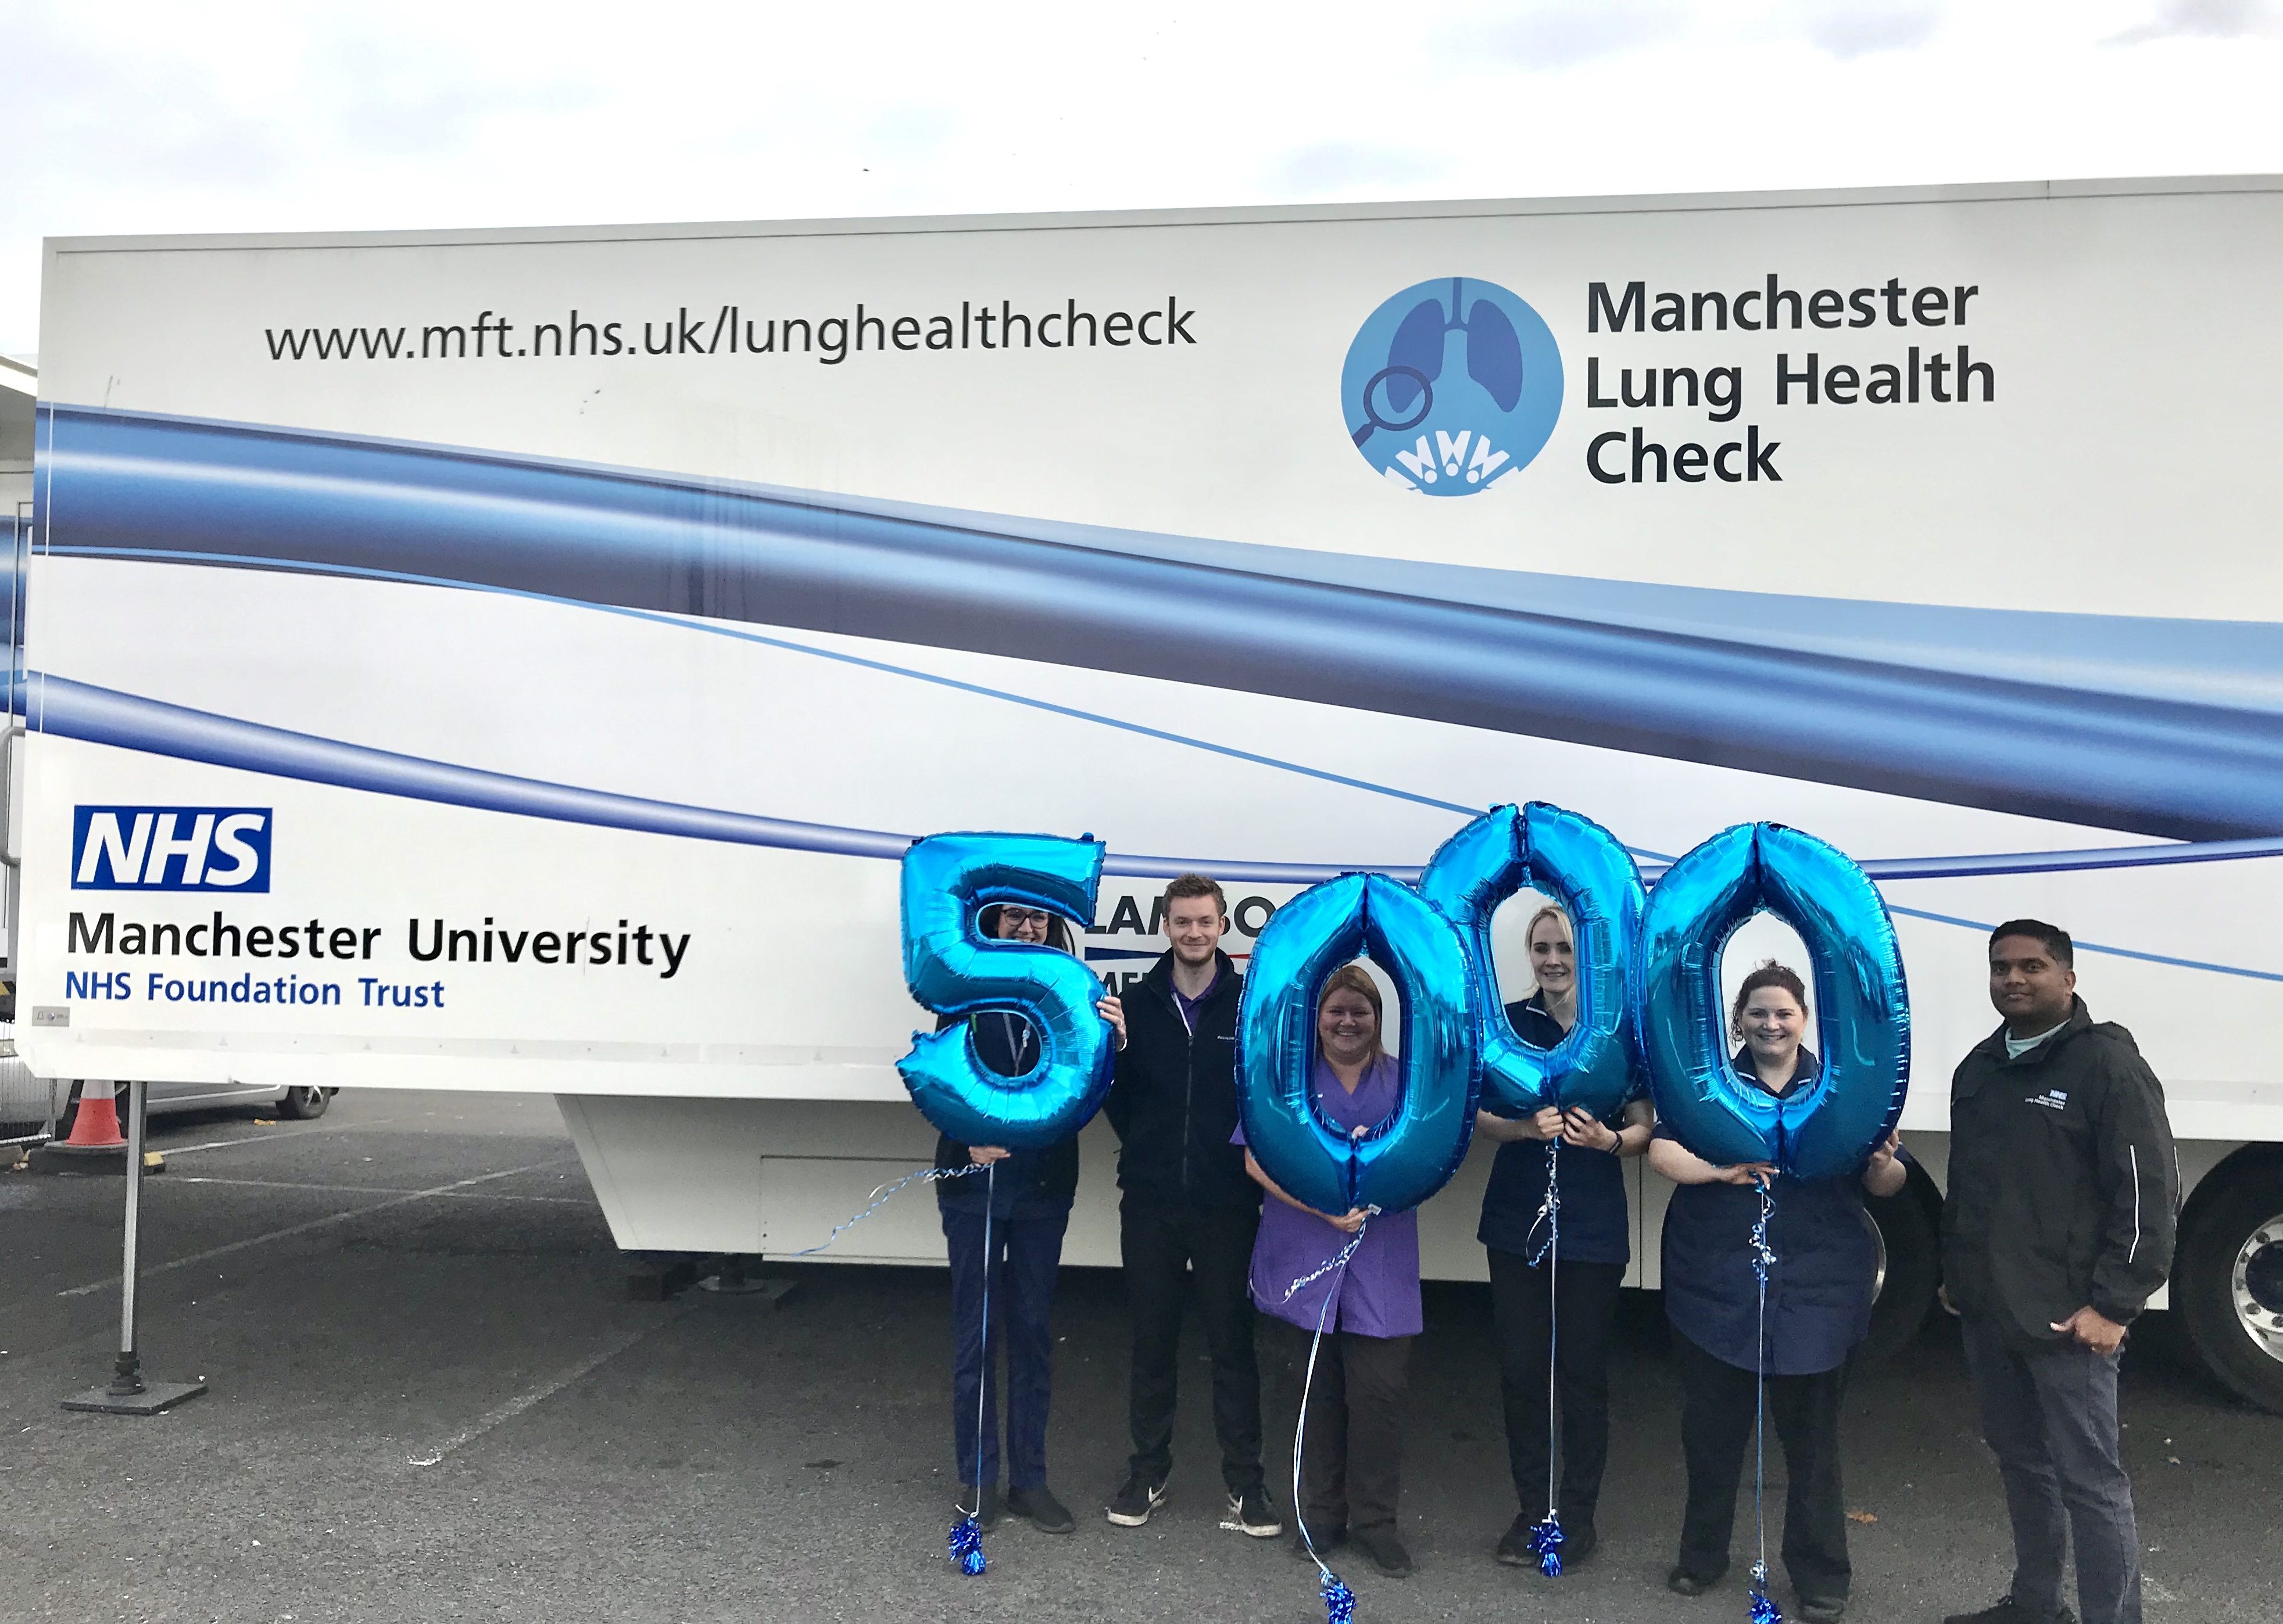 Celebrating the 5,000th Lung Health Check on 19th October 2019